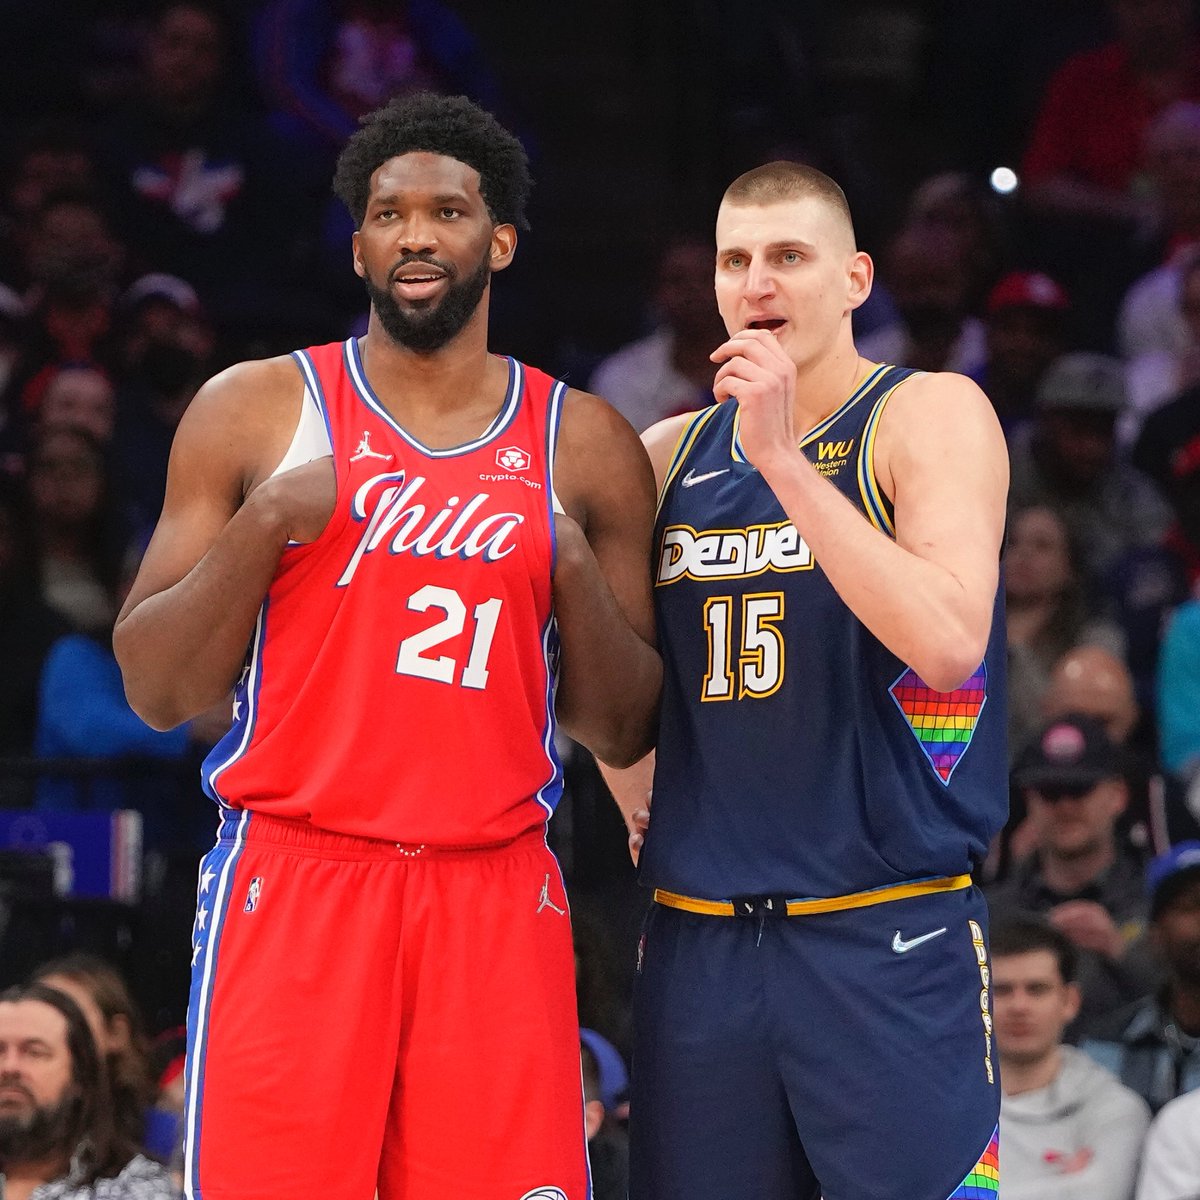 Joel Embiid vs Nikola Jokic this playoff run: 23.7 PPG 30.7 PPG 17.9% 3PT 47.5% 3PT 2.7 APG 9.7 APG MVP MUST STAND FOR MOST VALUABLE PLEADER 🤯💯🔥‼️